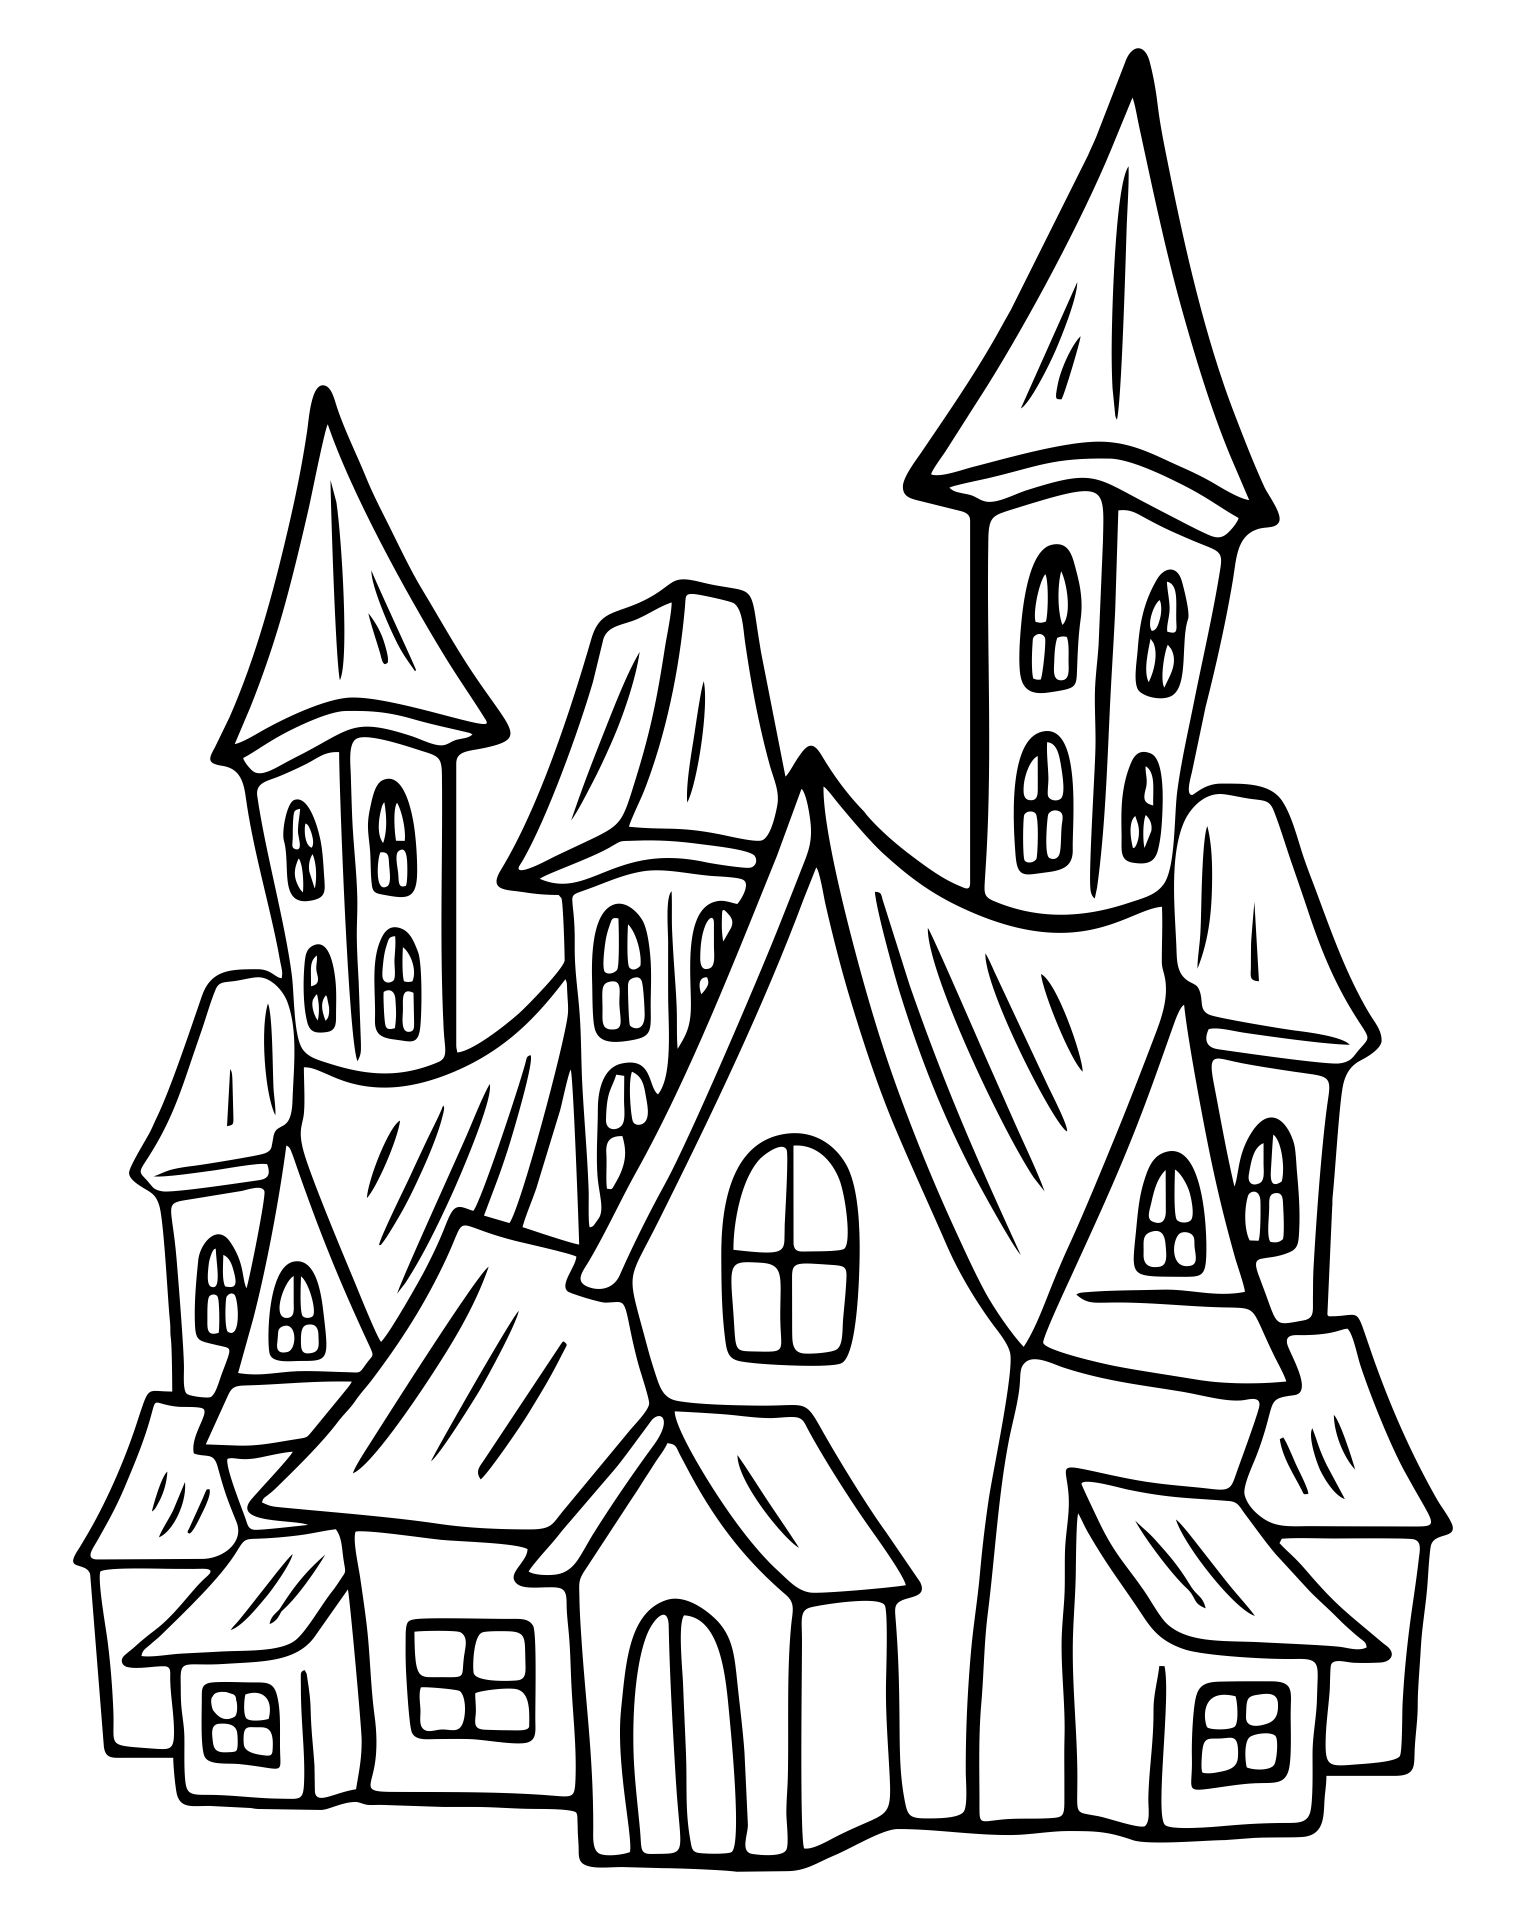 Happy Halloween House Coloring Page For Kids Printable Free